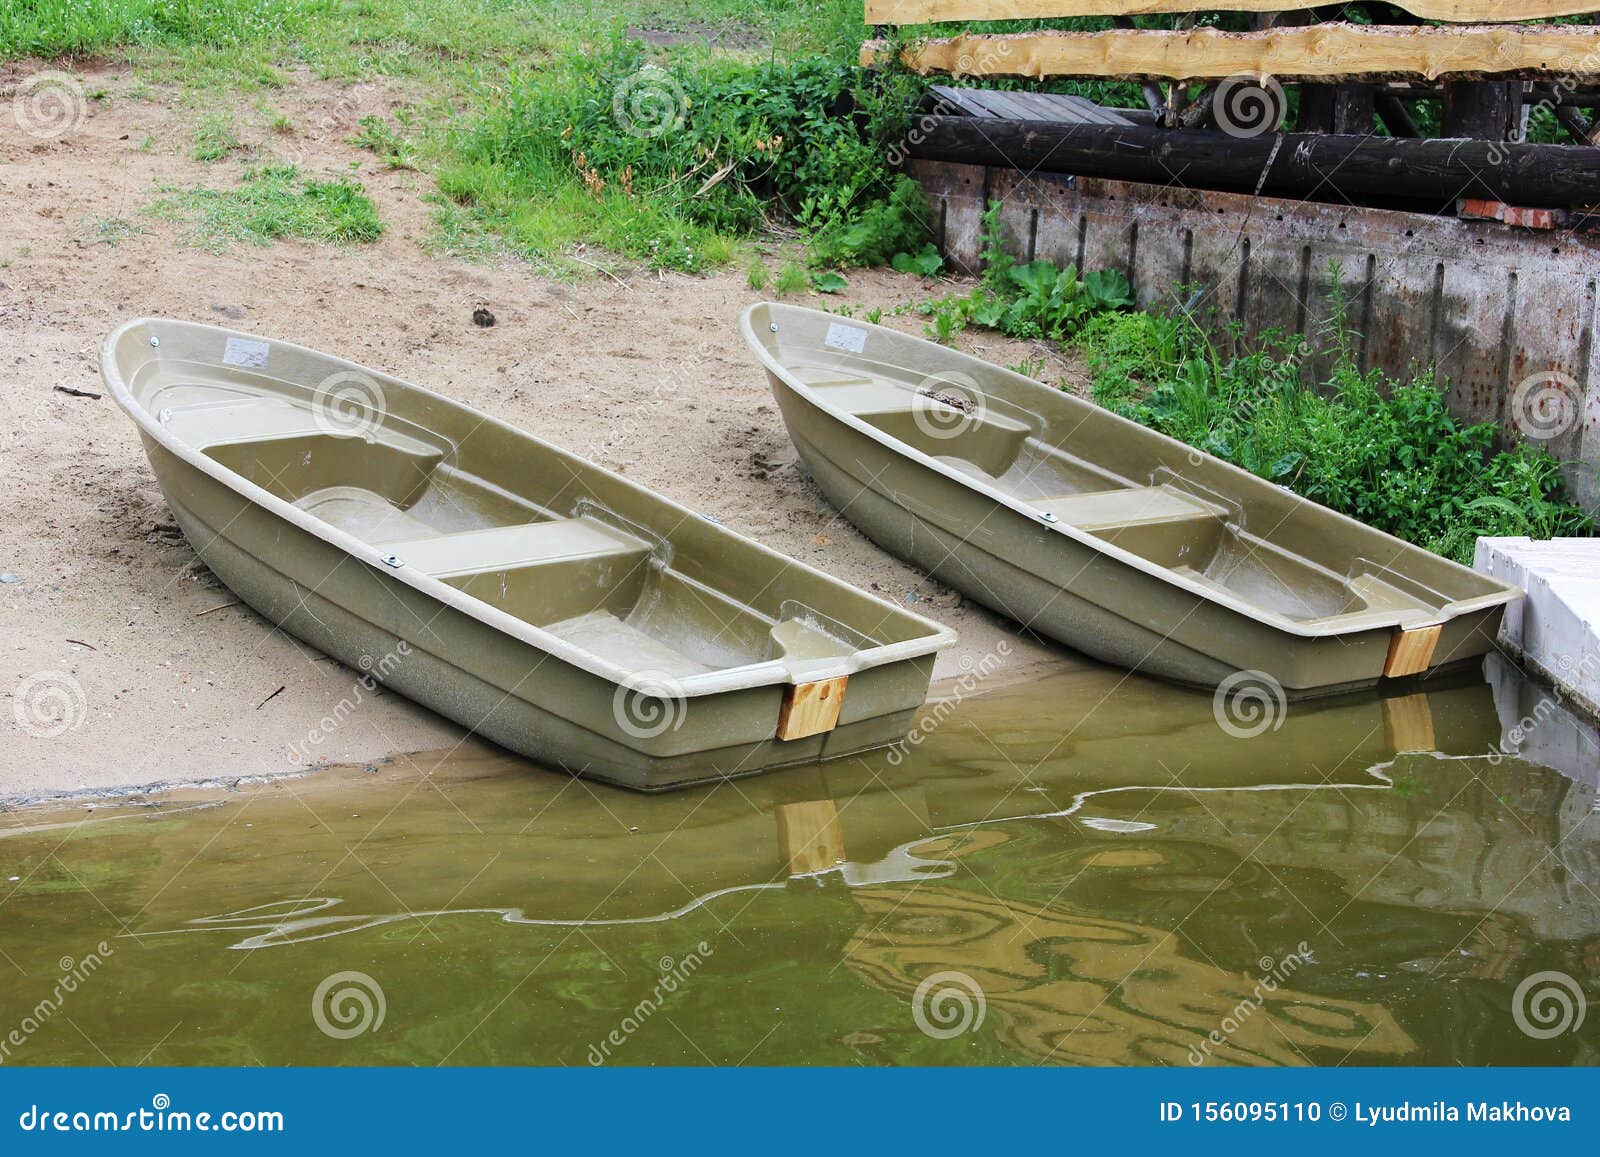 https://thumbs.dreamstime.com/z/two-plastic-boats-banks-river-istra-two-plastic-boats-banks-river-istra-summer-fishing-vacation-156095110.jpg